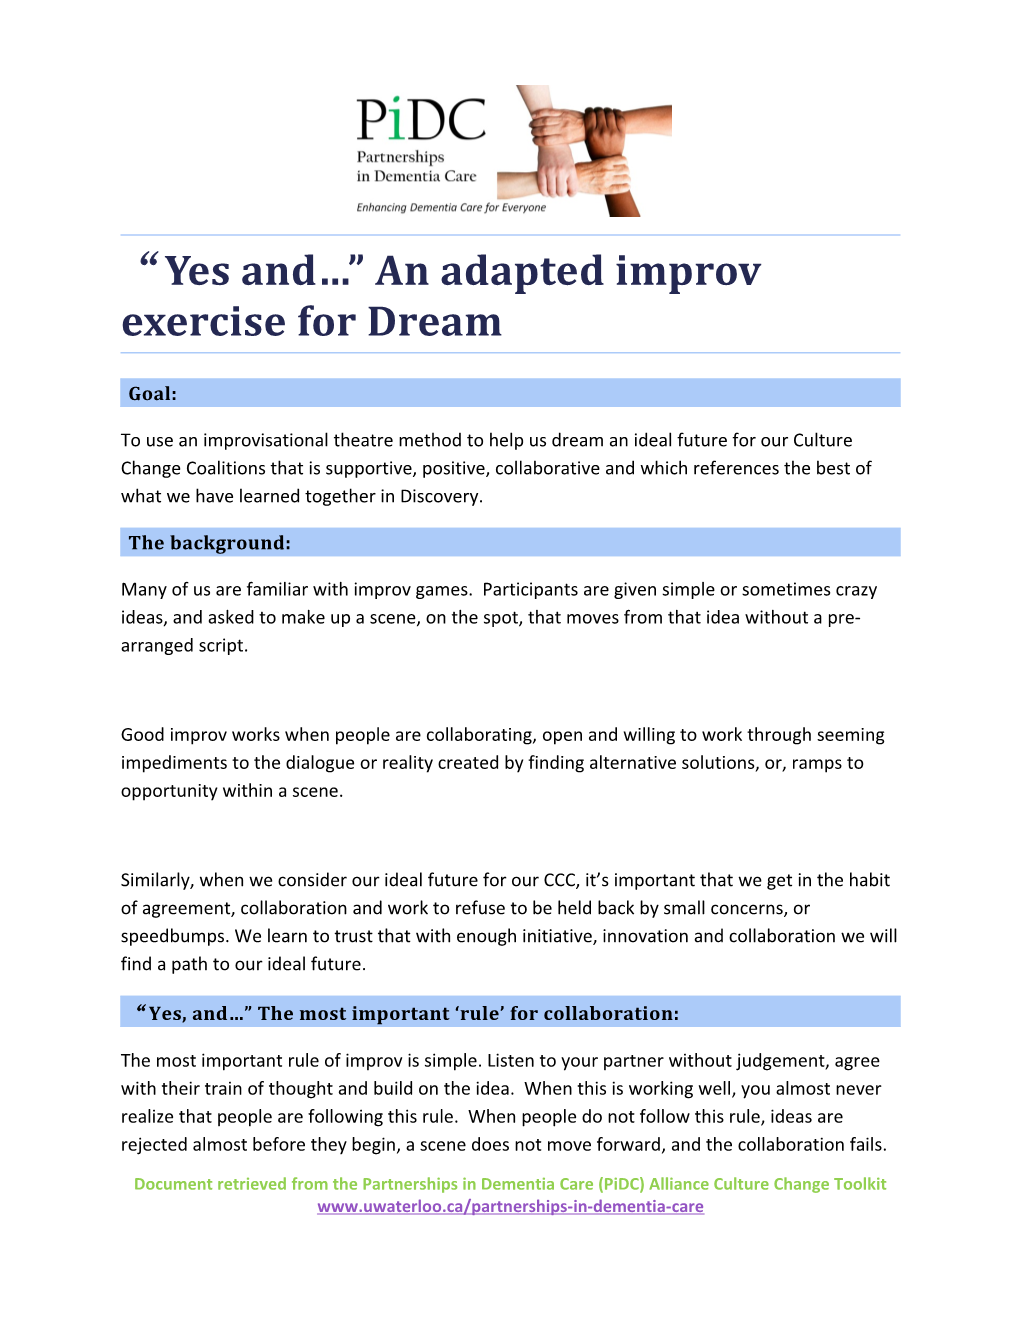 Yes and an Adapted Improv Exercise for Dream